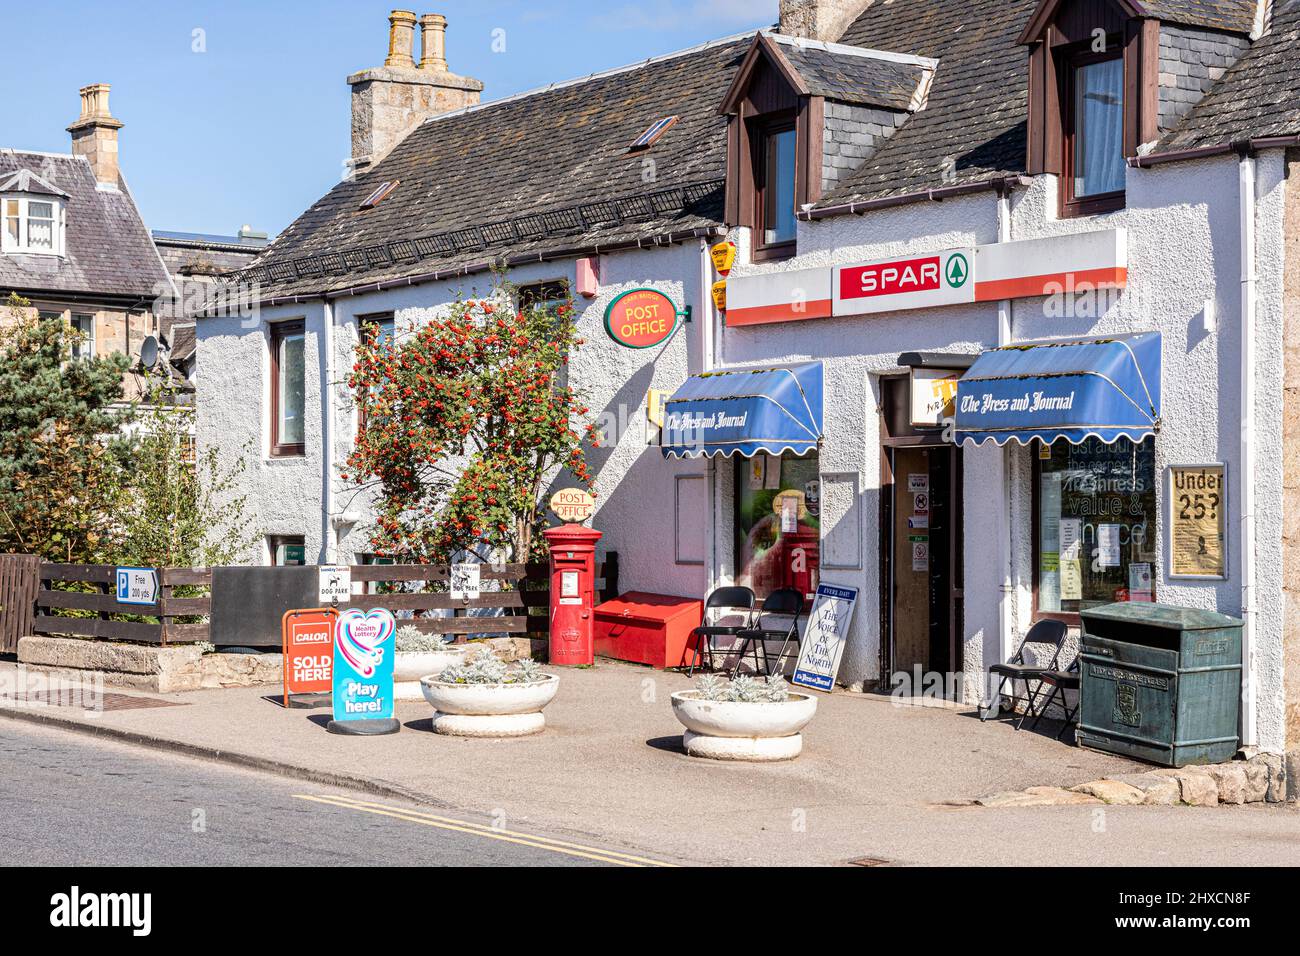 The Post Office and Spar local store in the village of Carrbridge, Highland, Scotland UK. Stock Photo